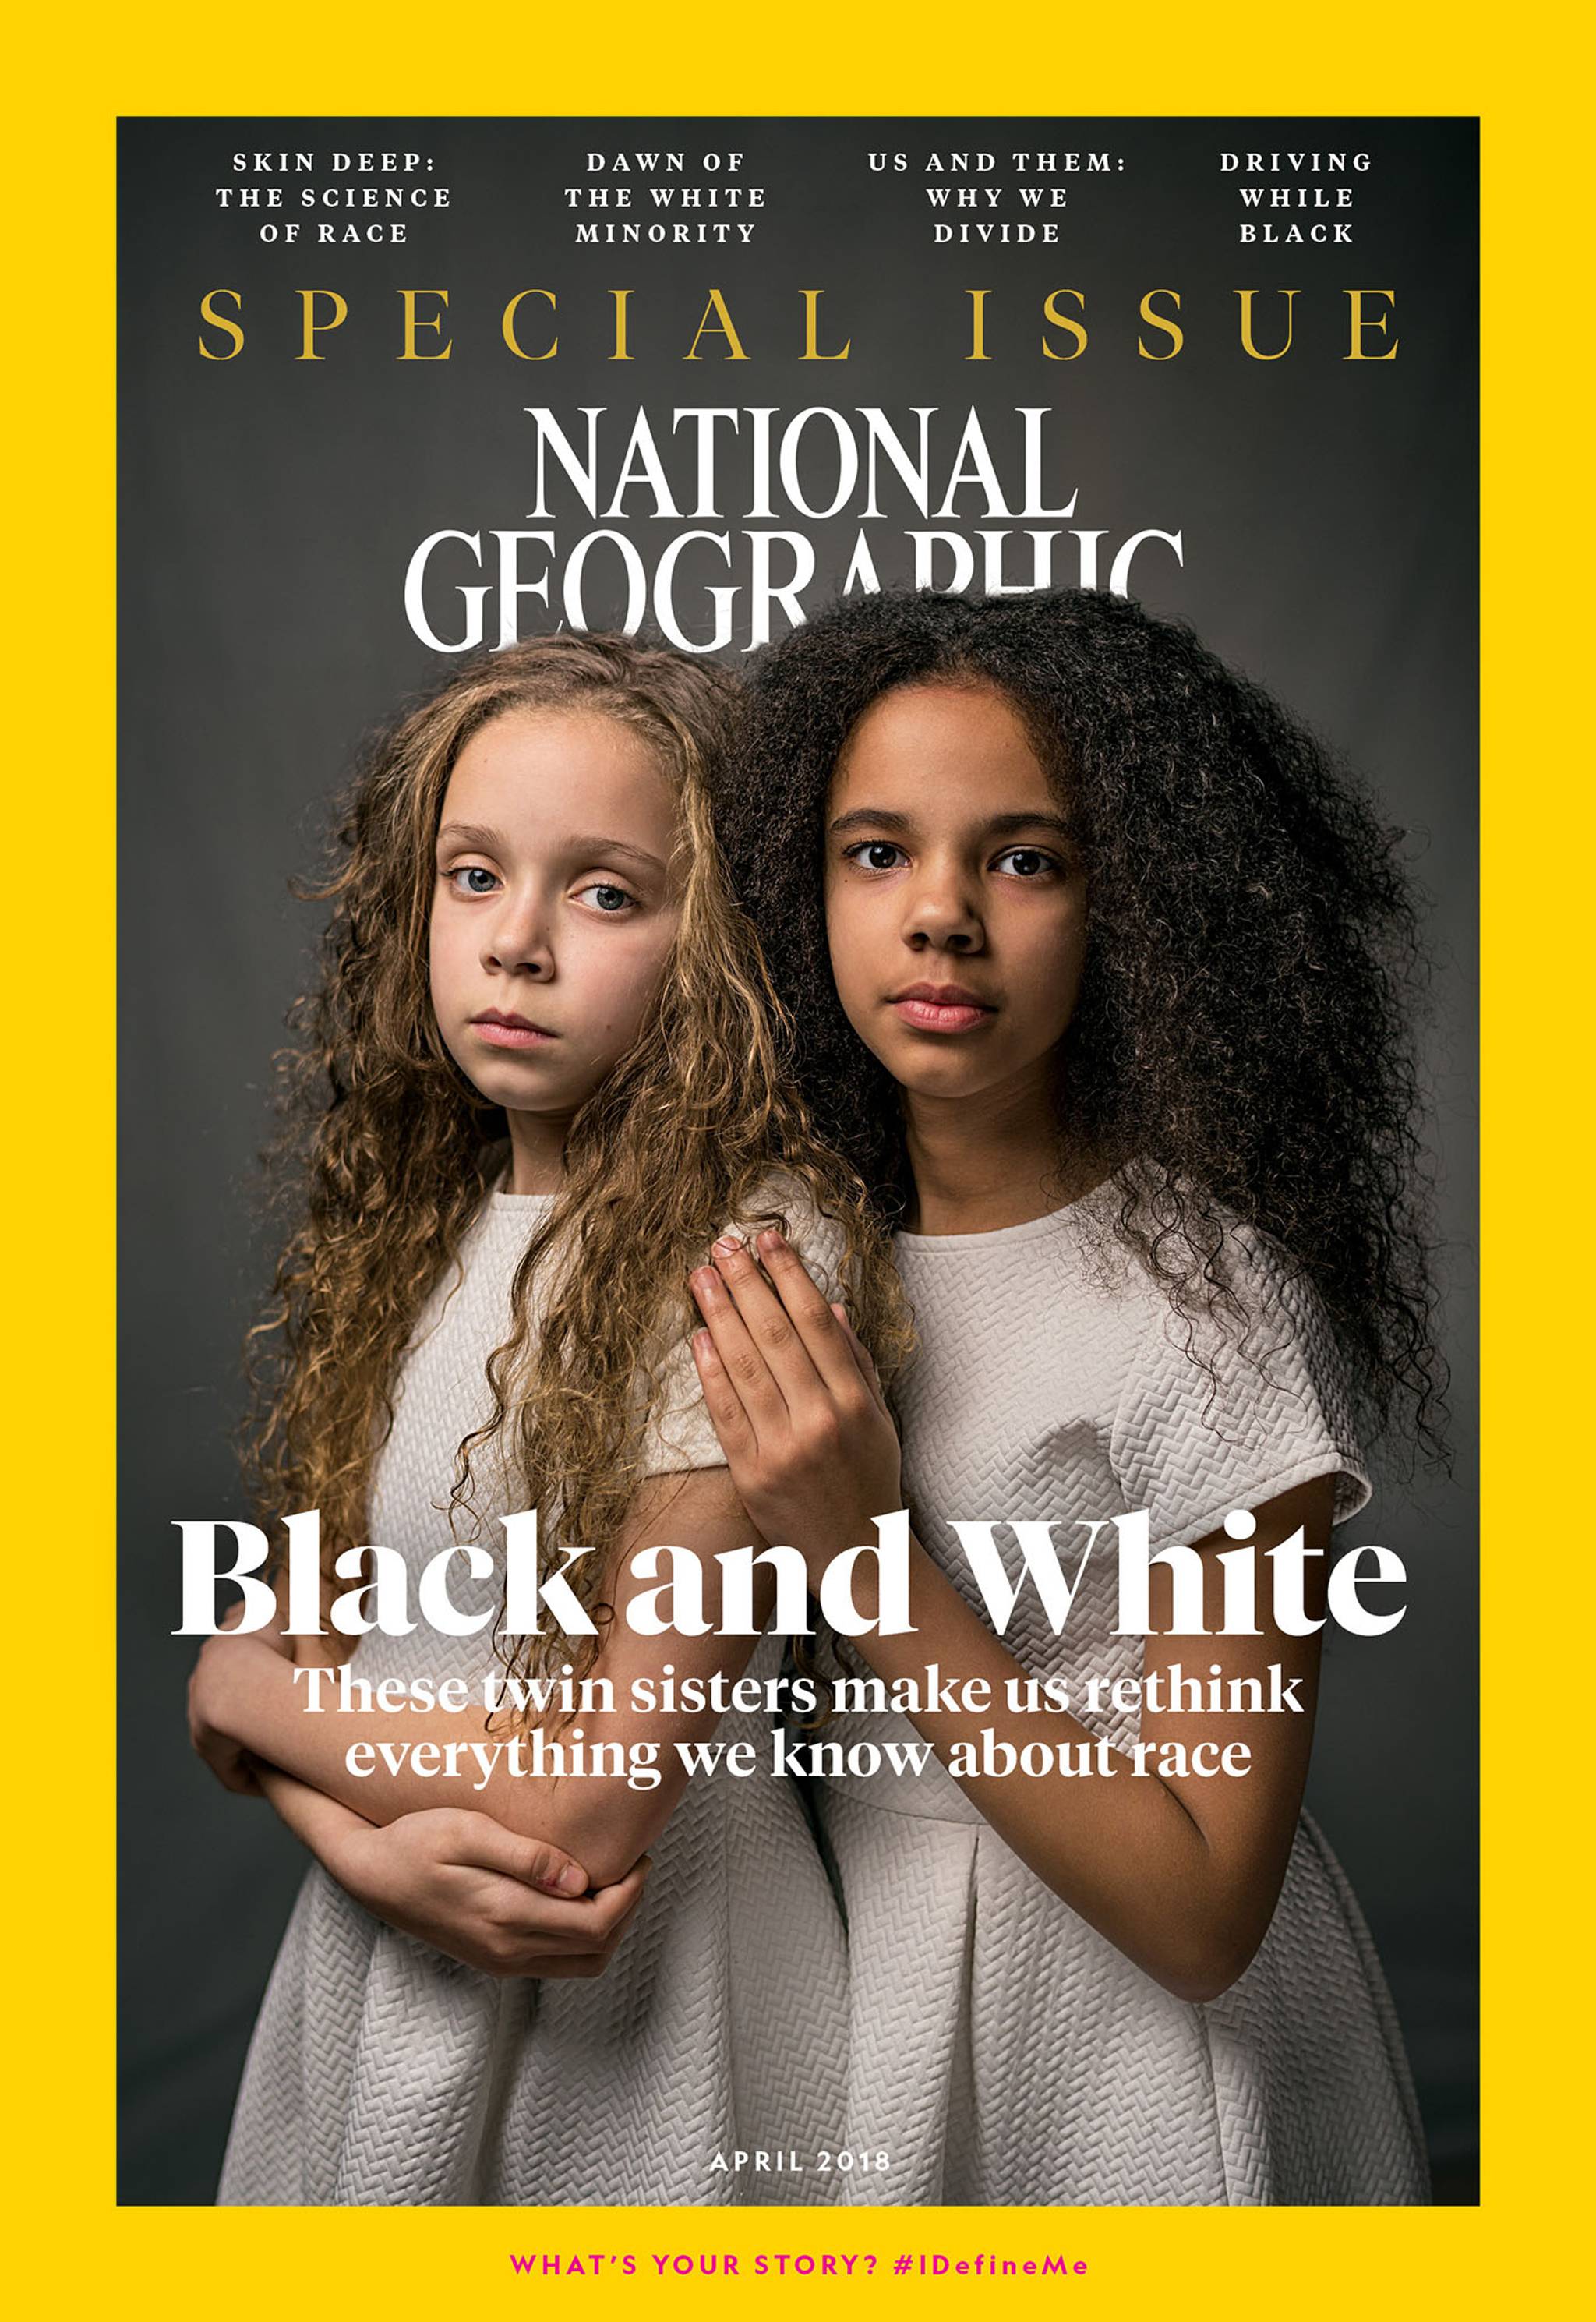 Nat Geo exhumes and apologises for its racist past